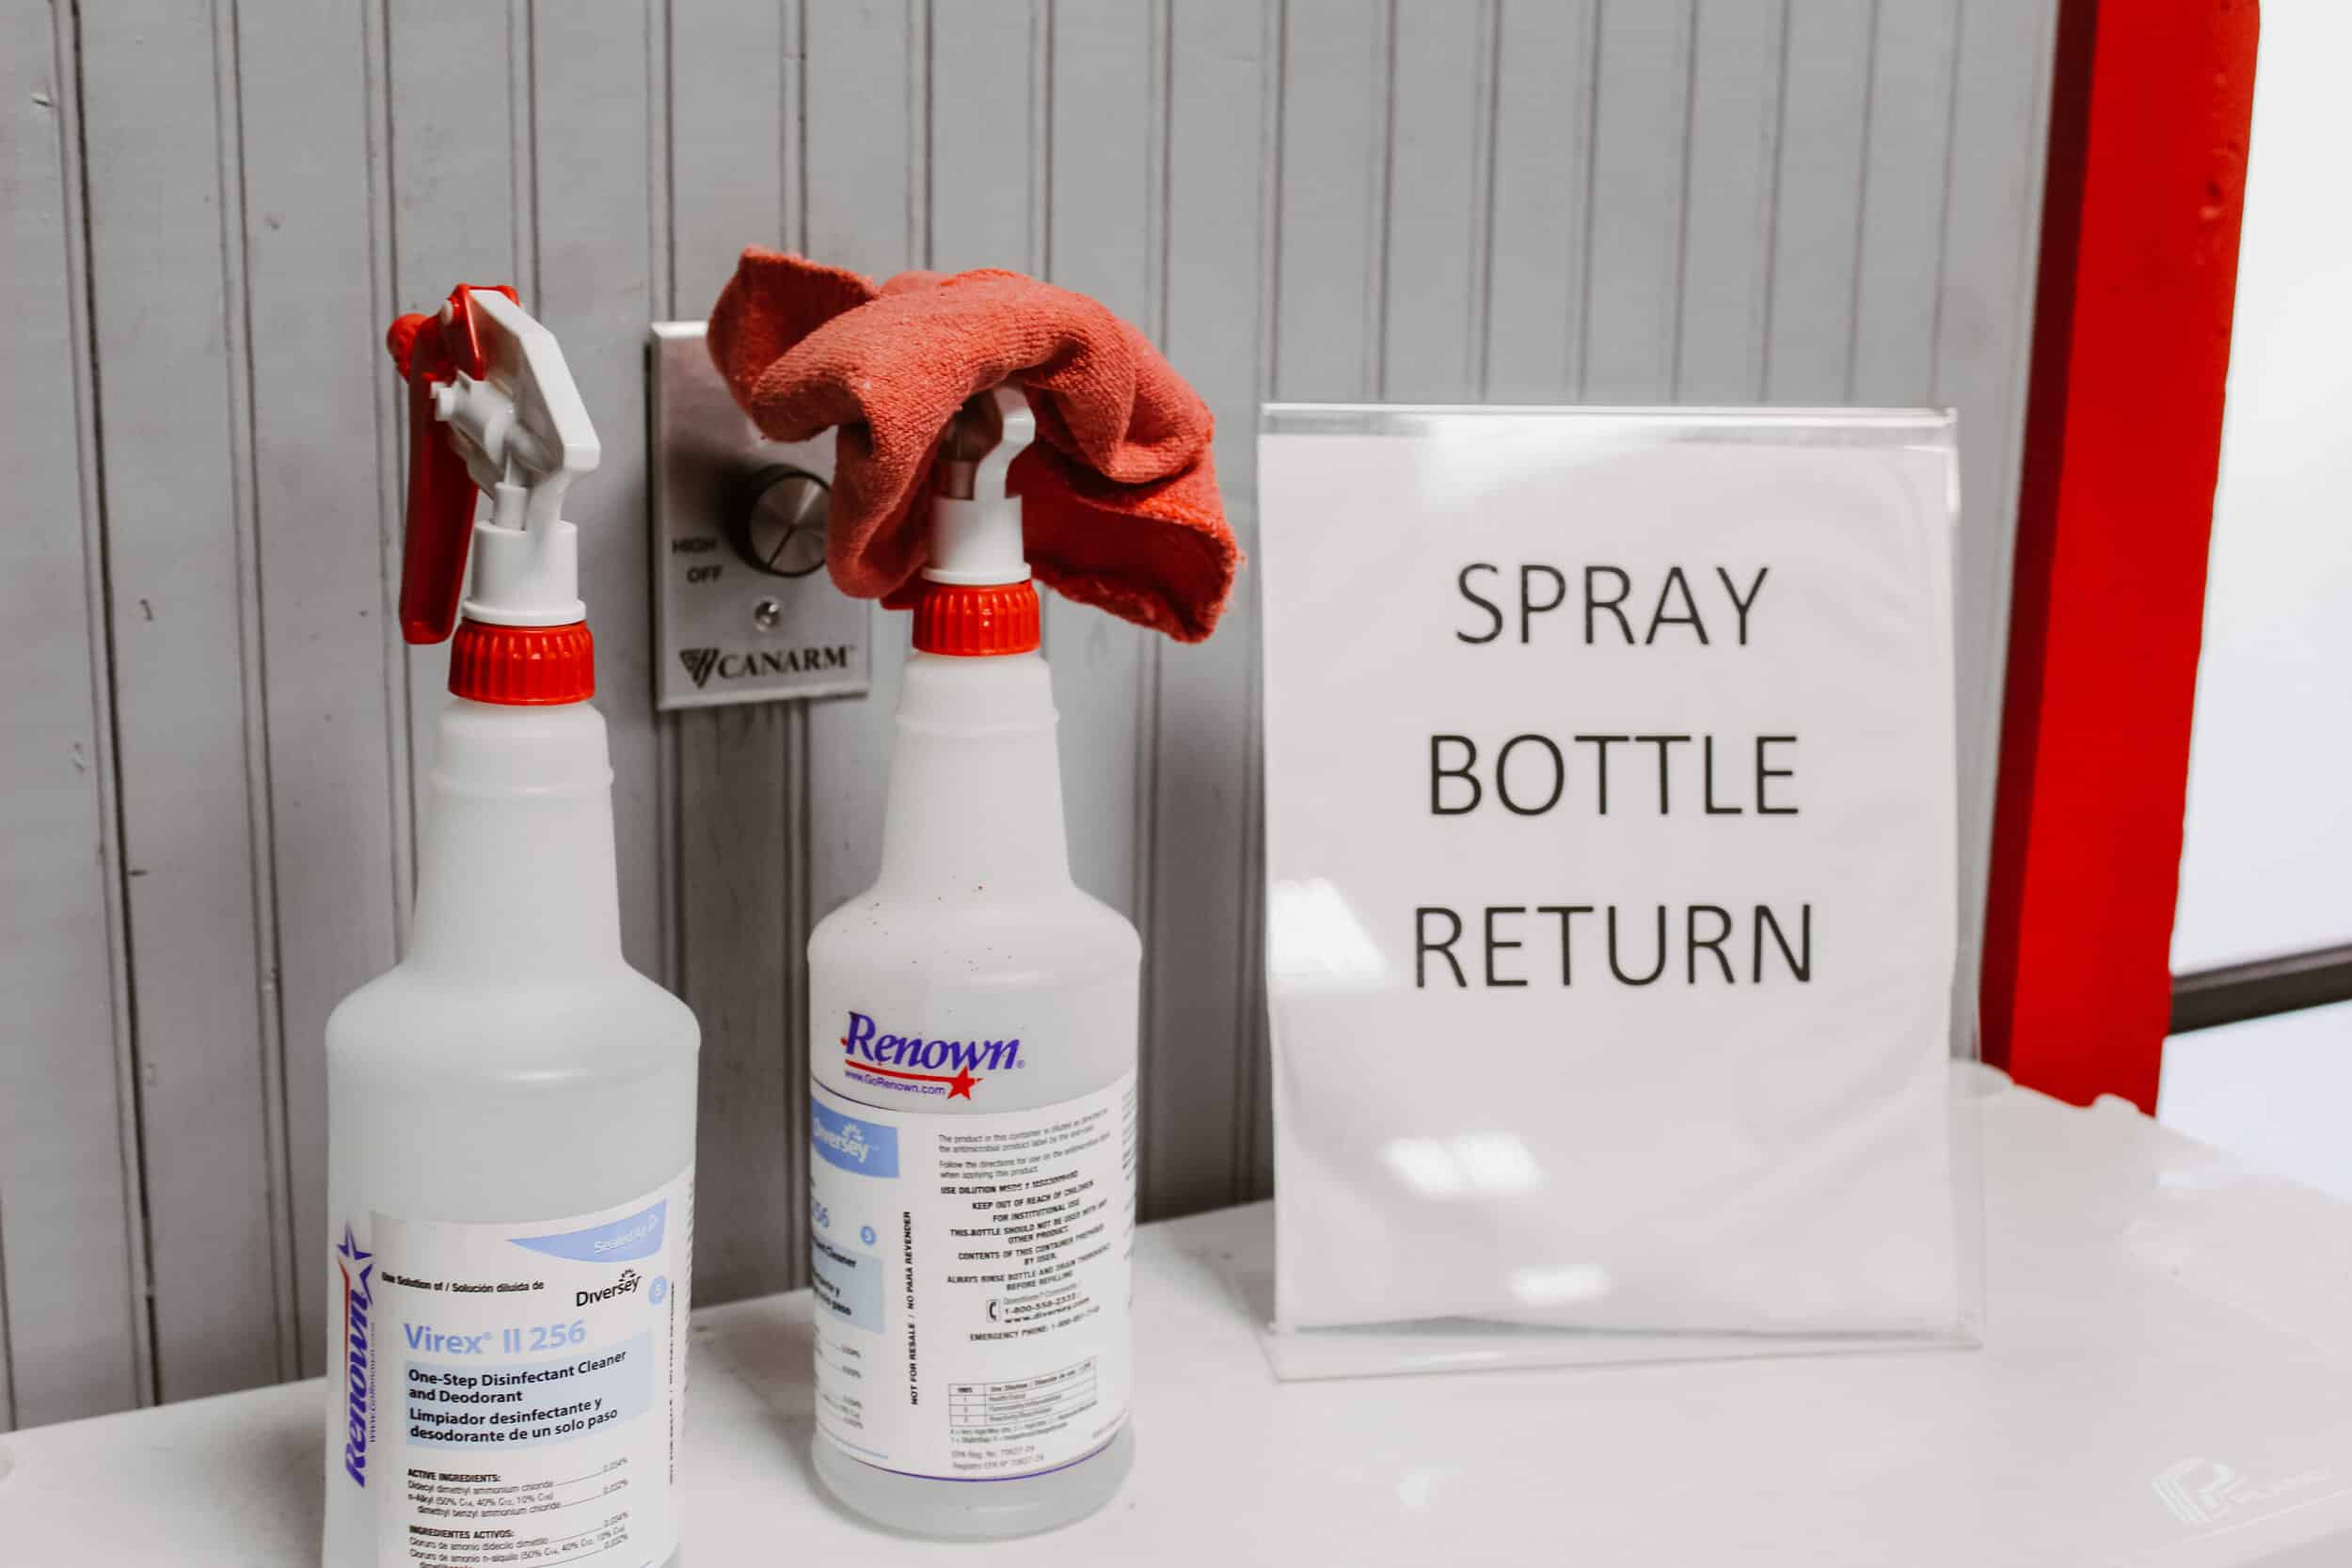 Upon leaving the gym, spray bottles and rags must be left so that the desk worker can properly clean and restock cleaning equipment for use.